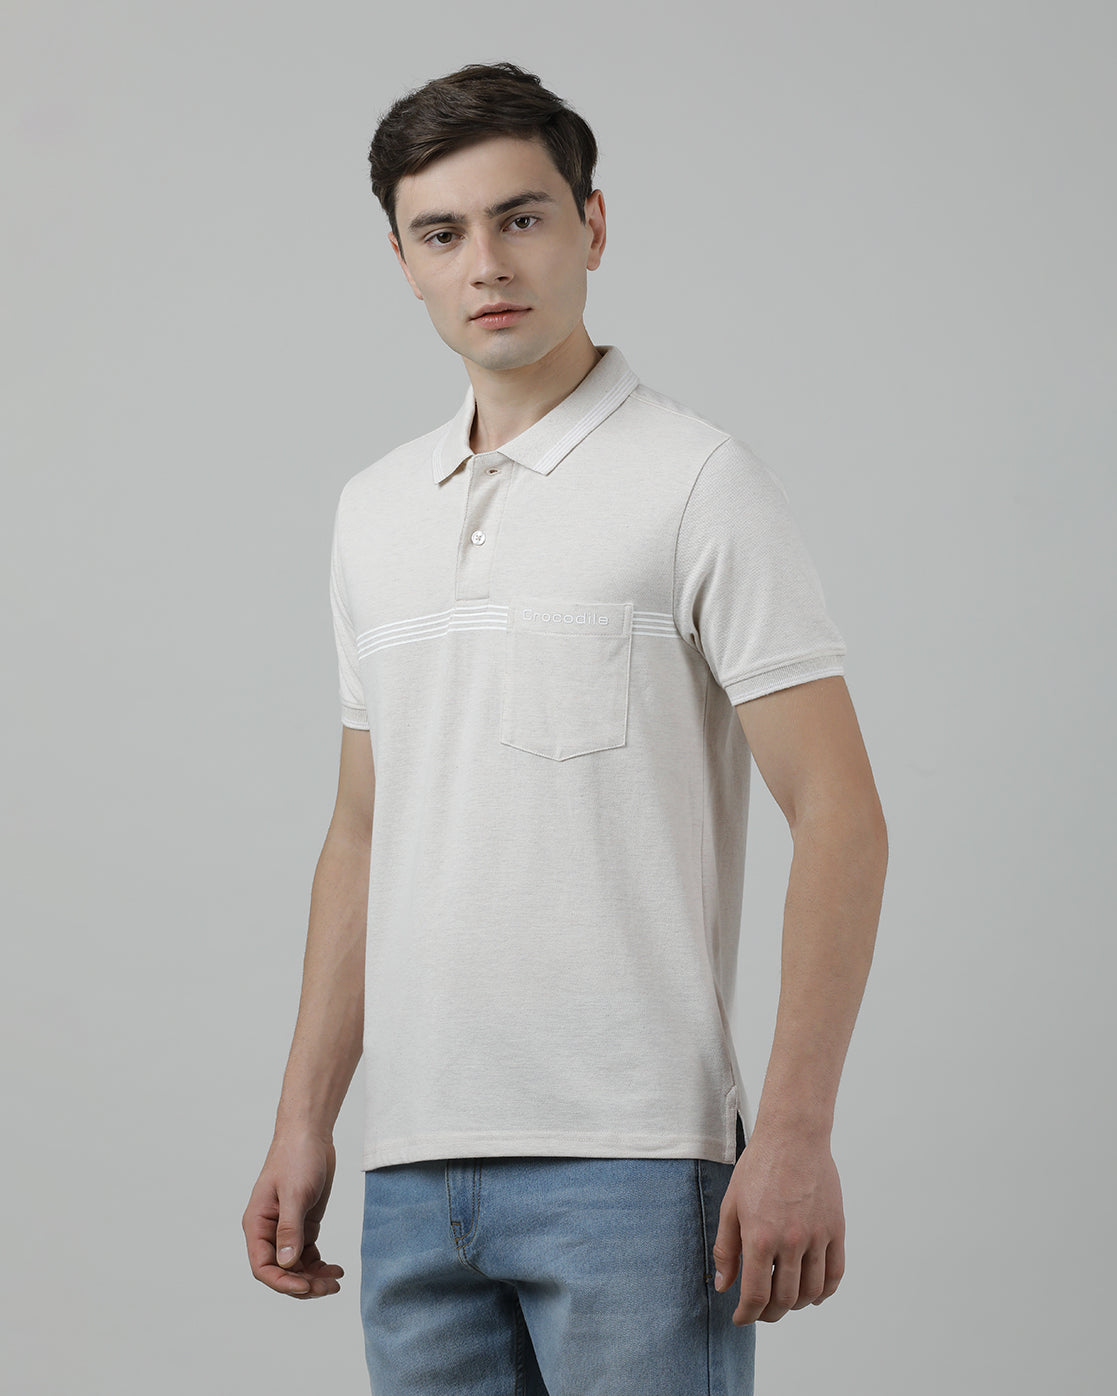 Casual Beige Solid Polo Melange Printed T-Shirt Half Sleeve Slim Fit with Collar for Men